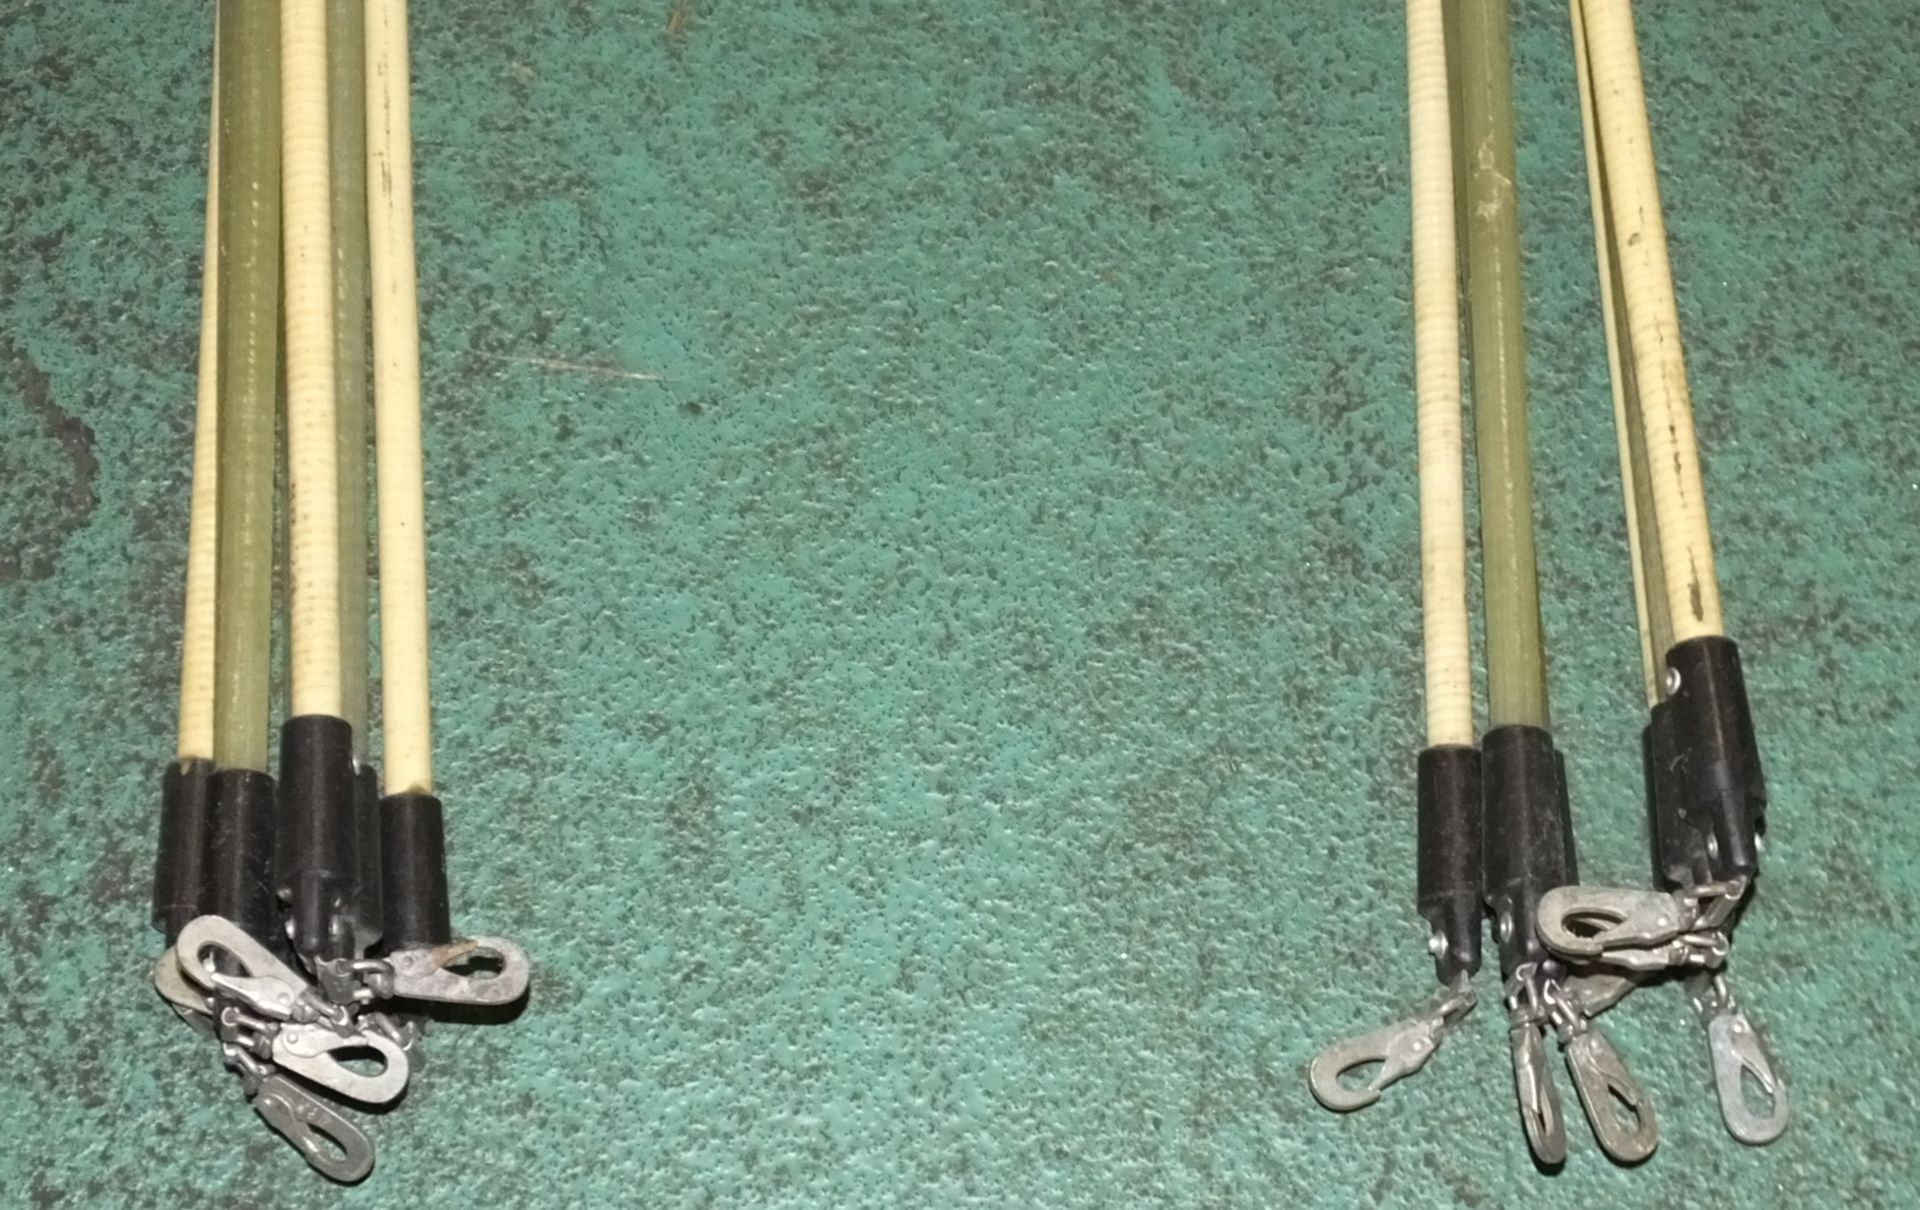 7x pull sled harnesses - Image 2 of 3